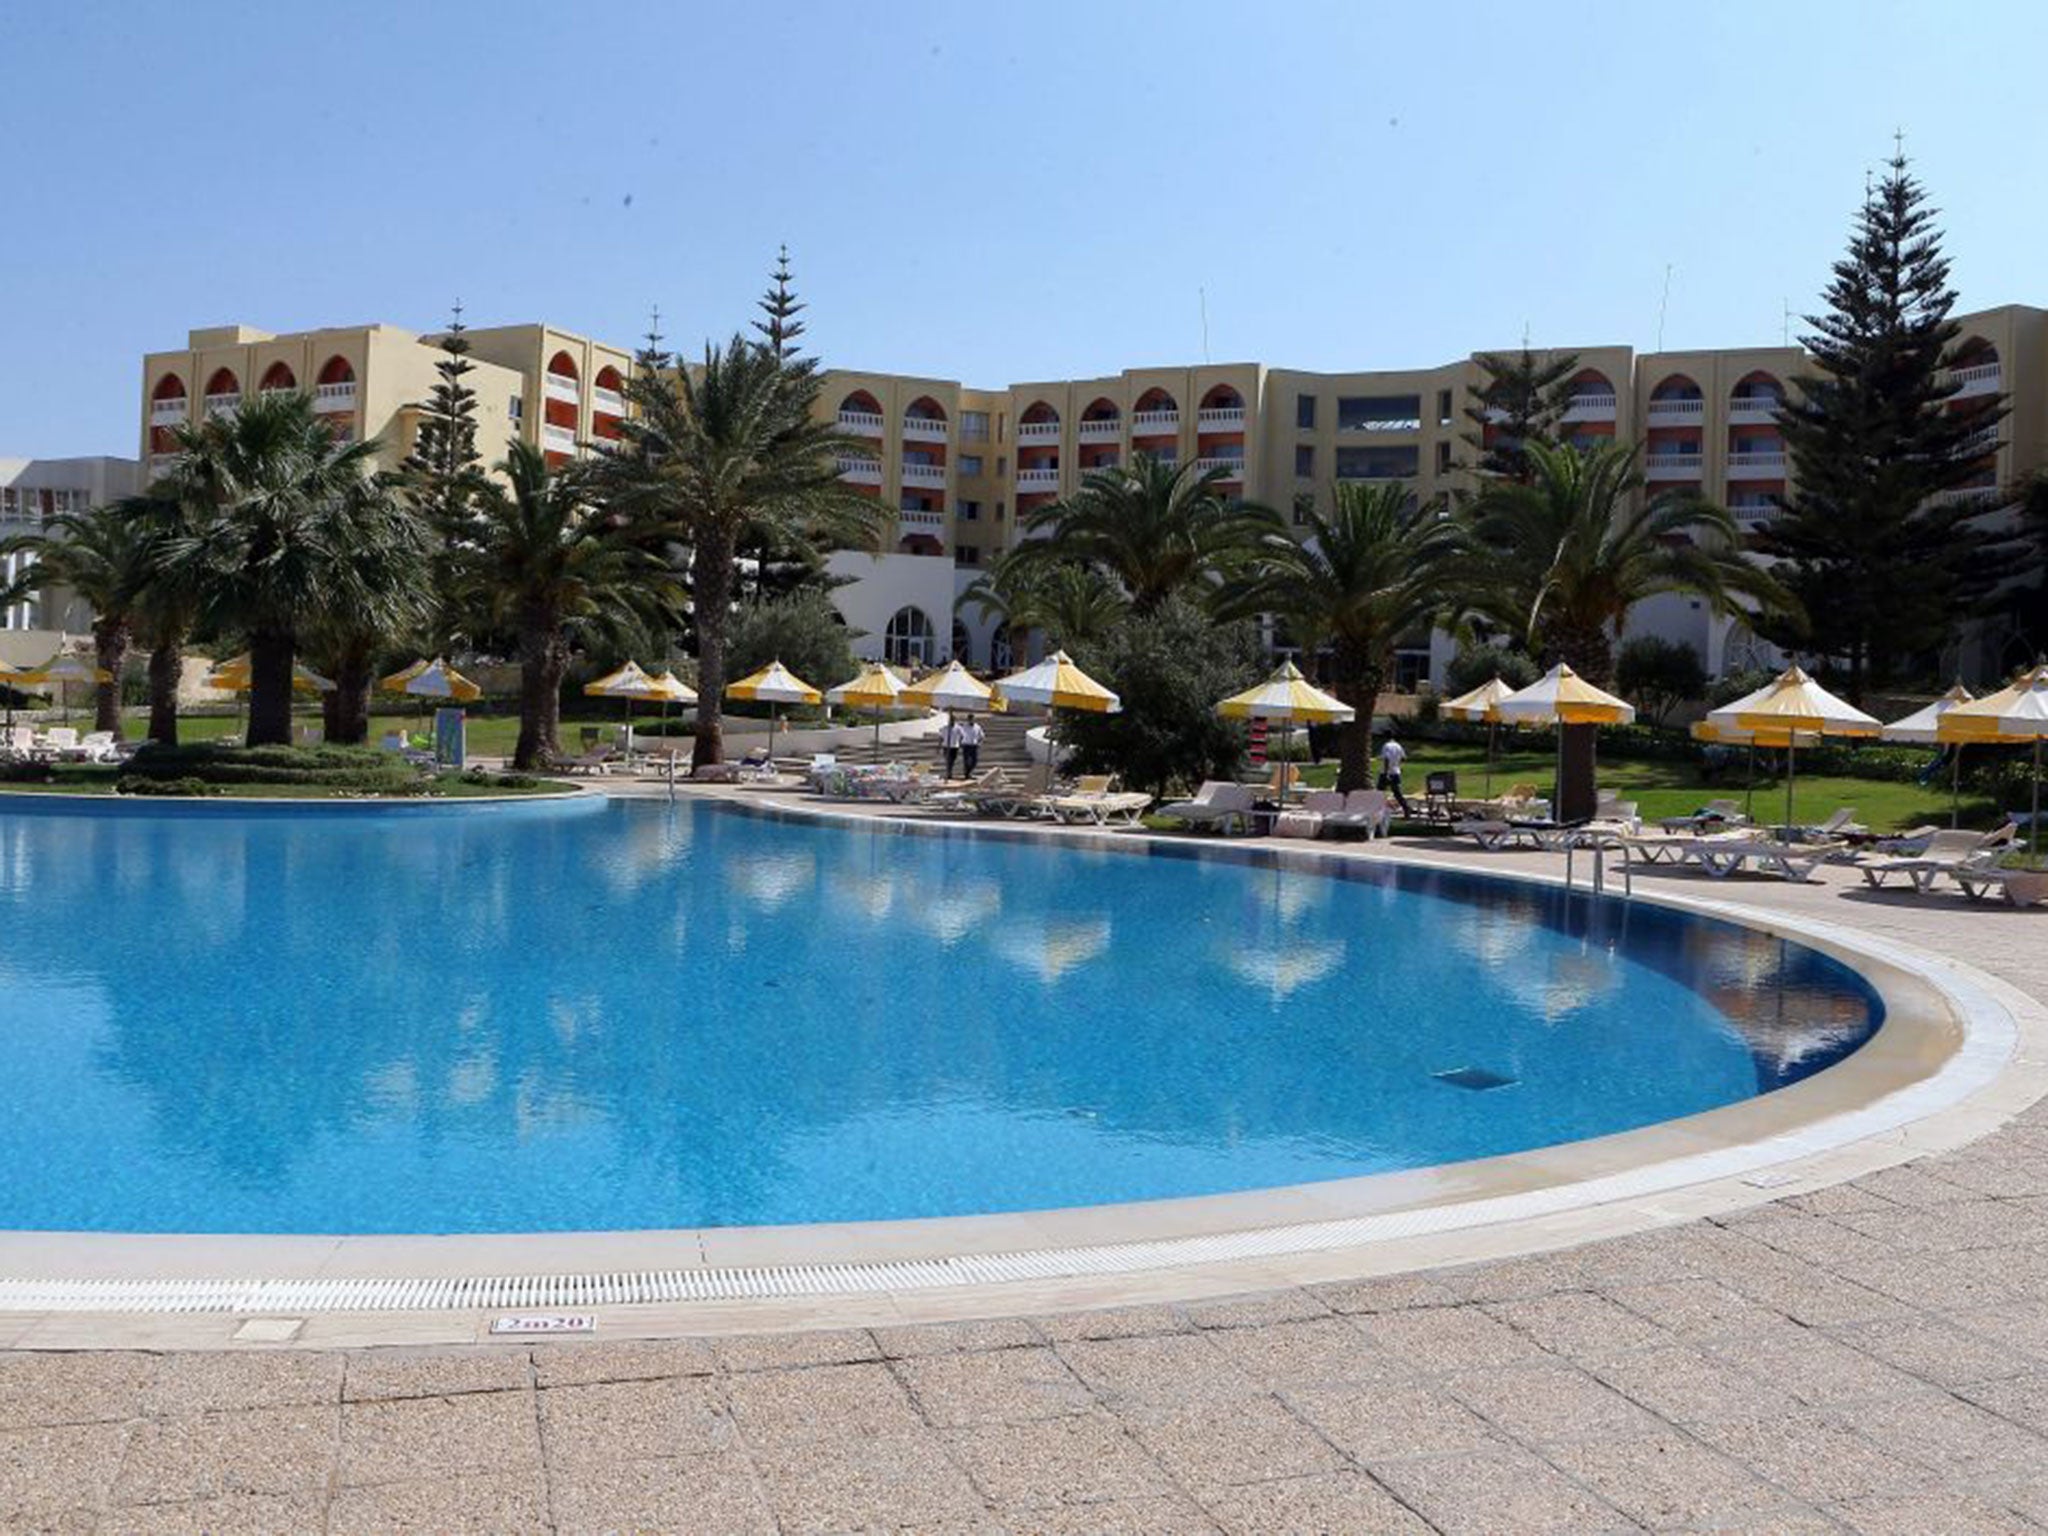 A general view of the deserted pool and deck chairs at the Imperial Marhaba Hotel